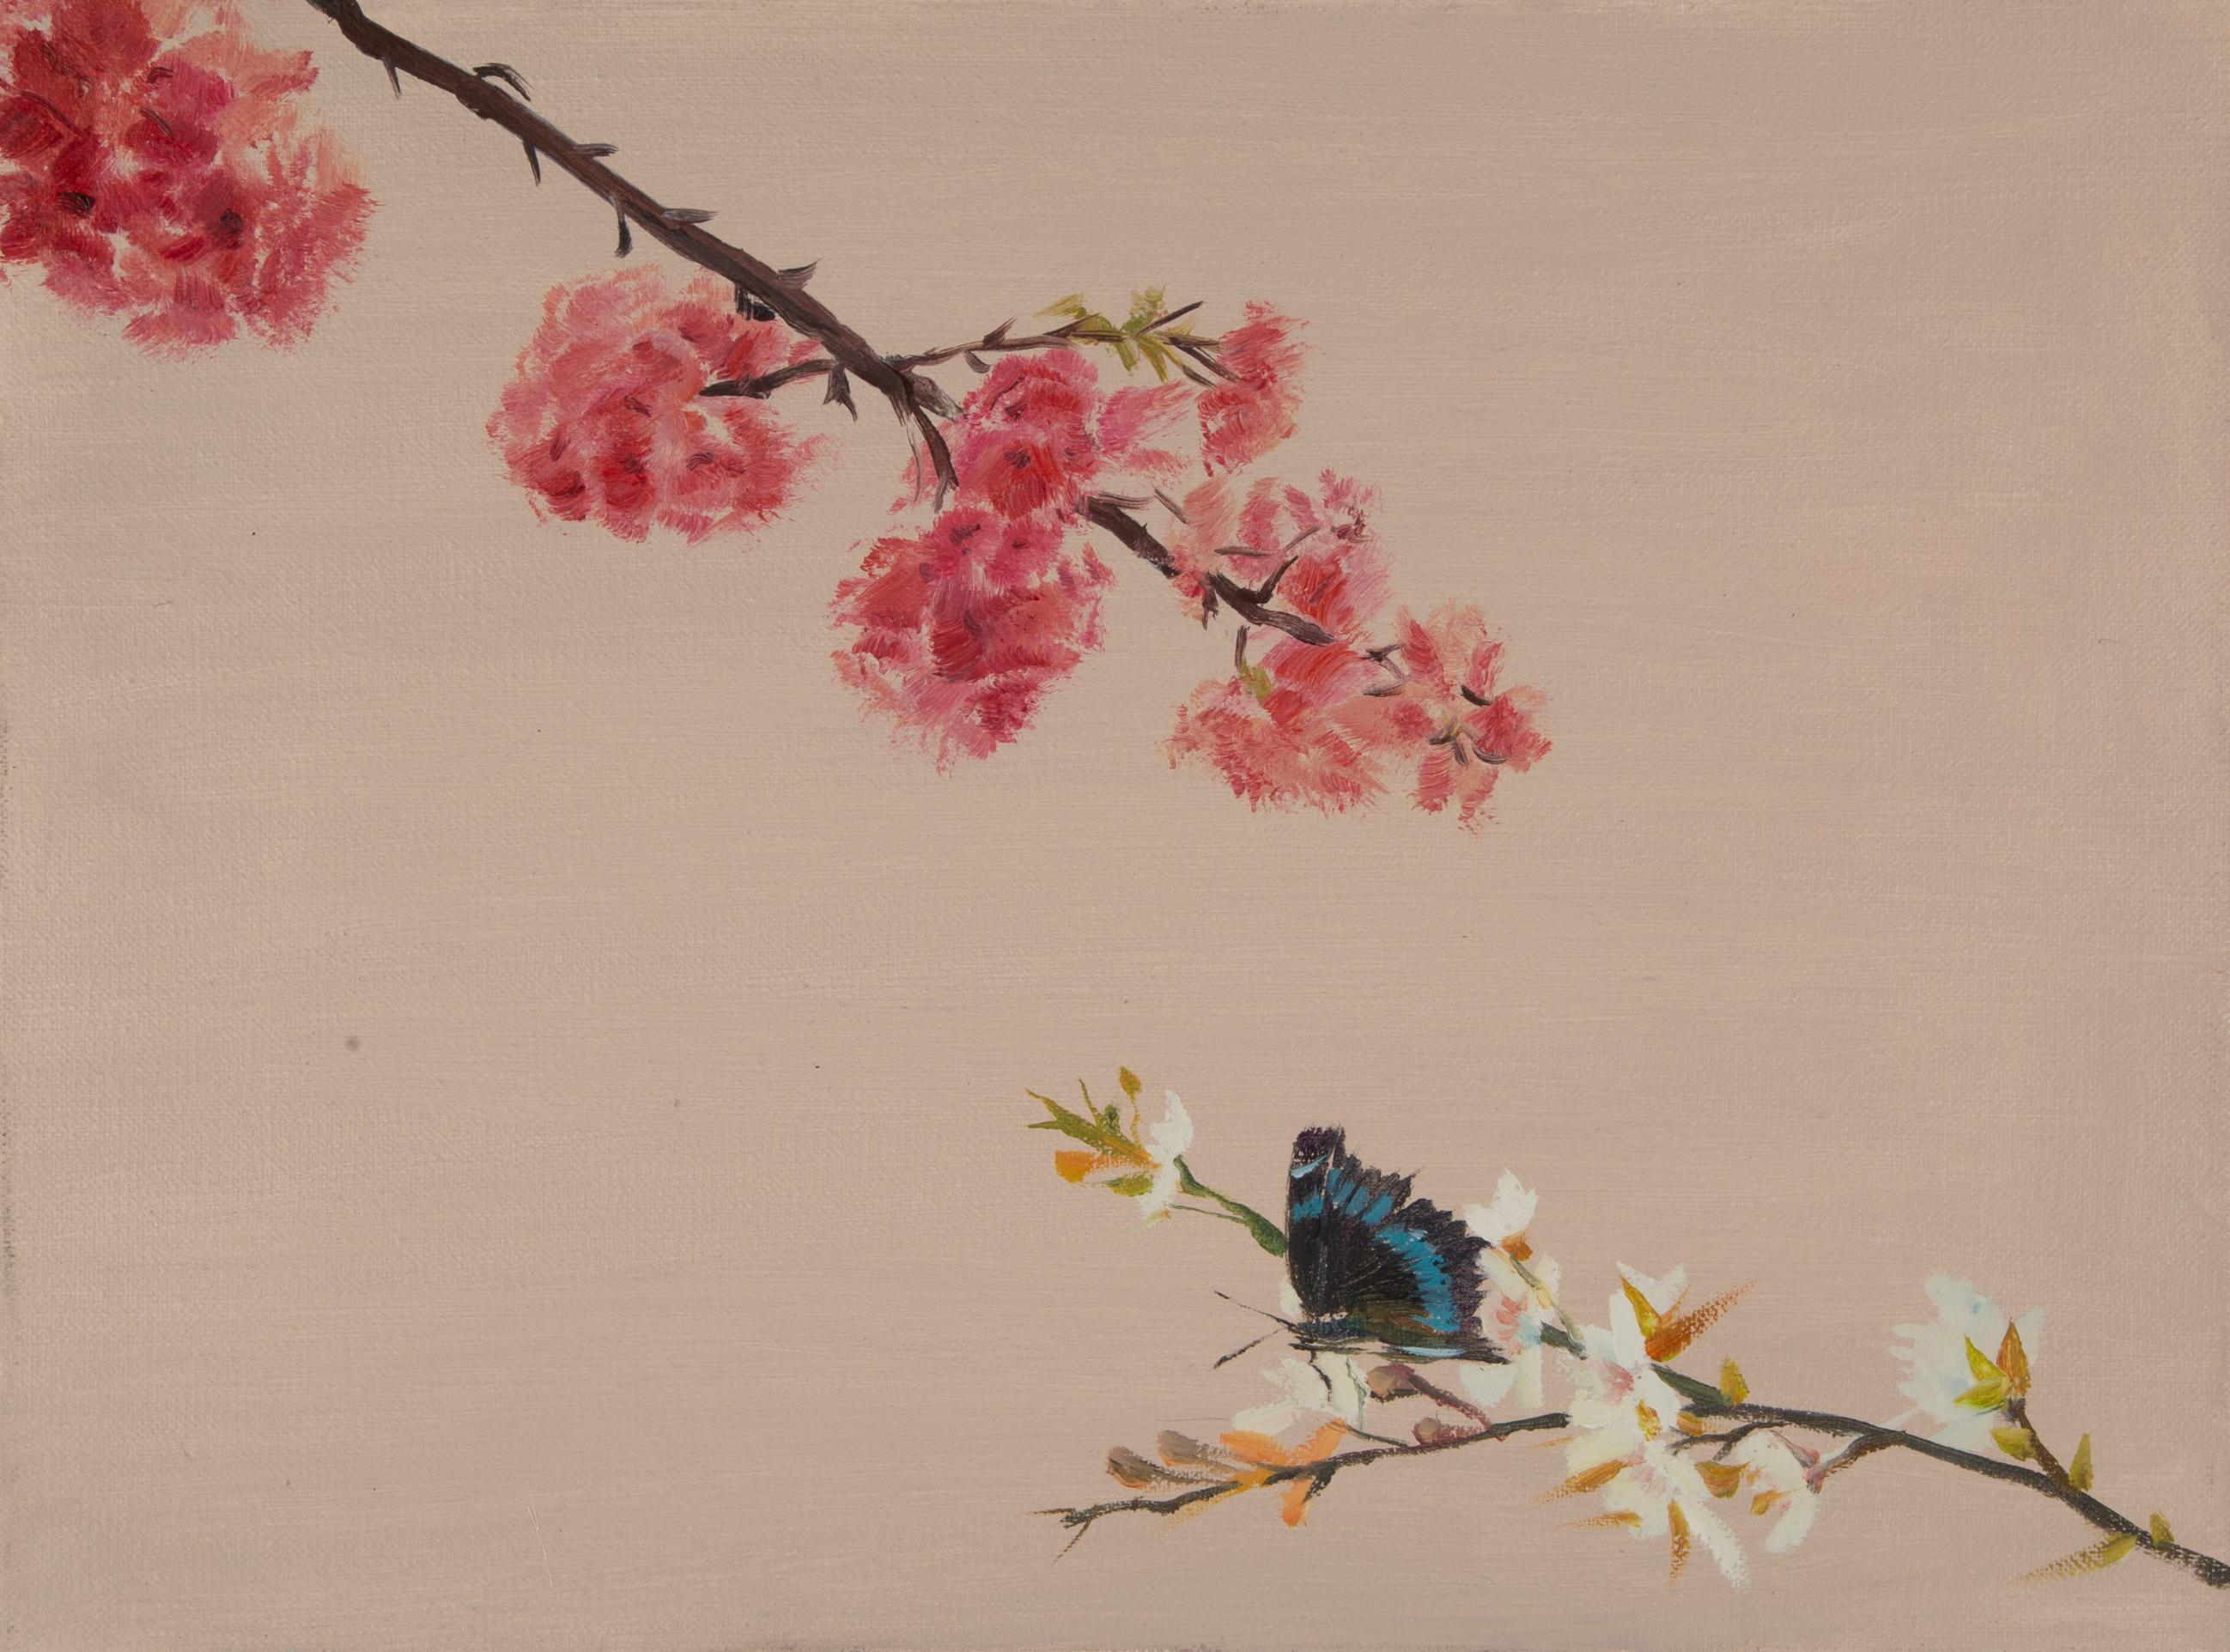 Title: Early Spring IV
Medium: Oil on canvas
Size: 12 x 16 inches
Frame: Framing options available!
Condition: The painting appears to be in excellent condition.
Note: This painting is unstretched
Year: 2000 Circa
Artist: Tao Yu
Signature: